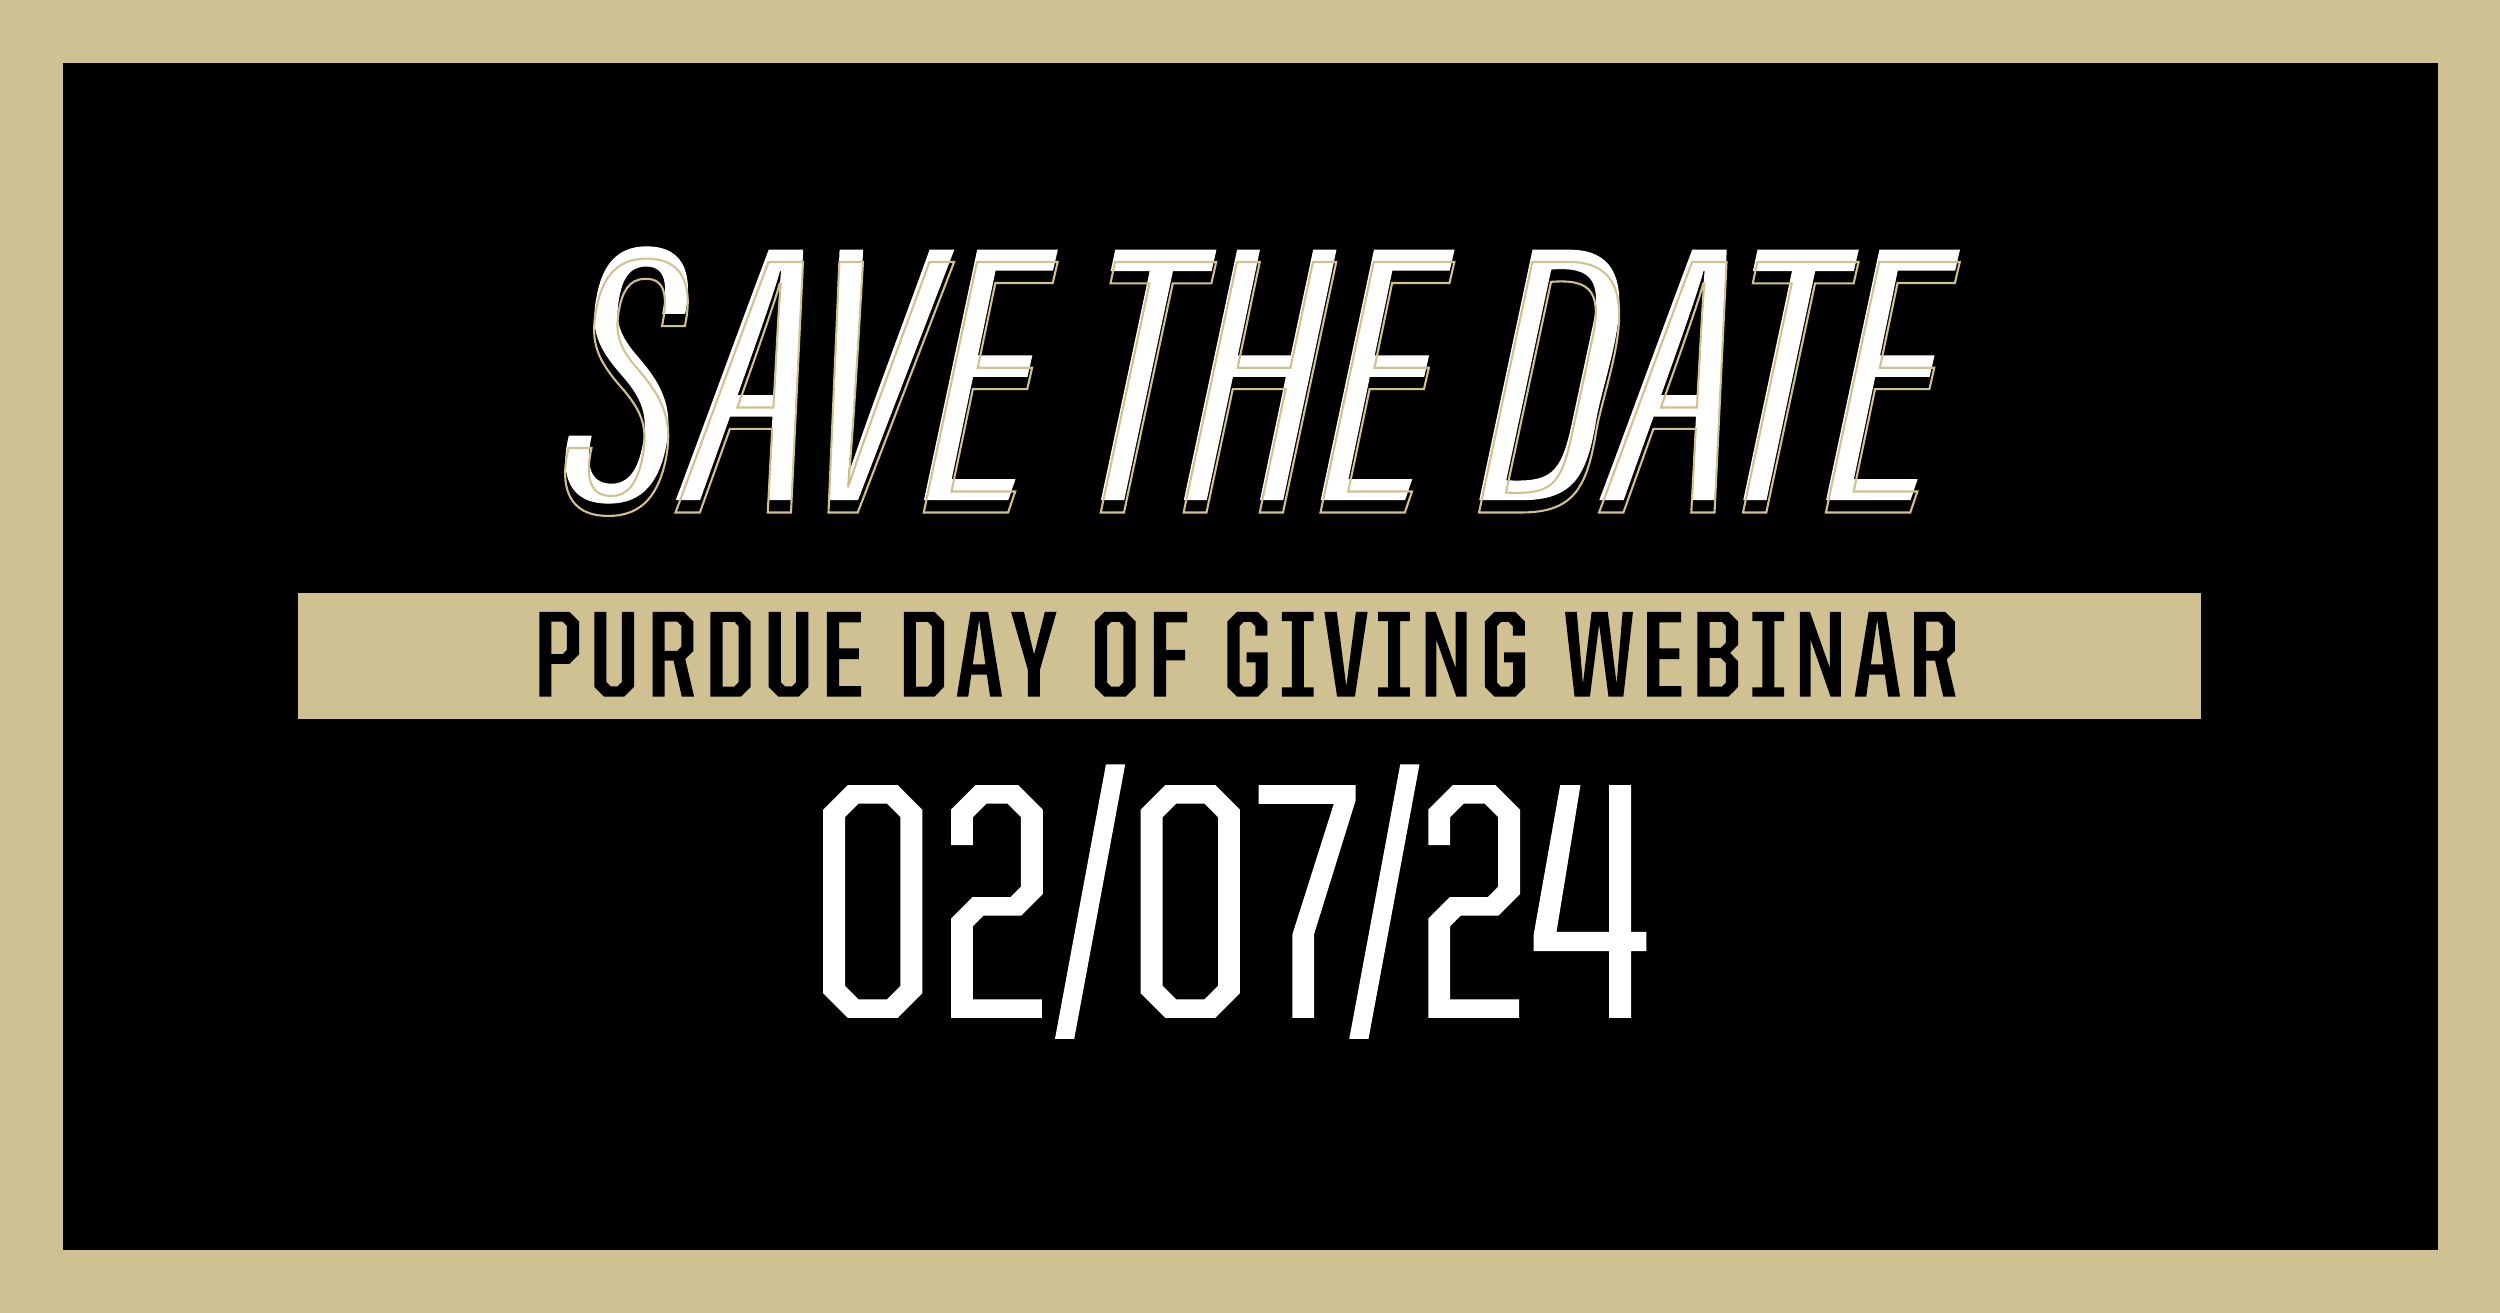 Purdue Day of Giving Webinar - Save the Date for February 7, 2024